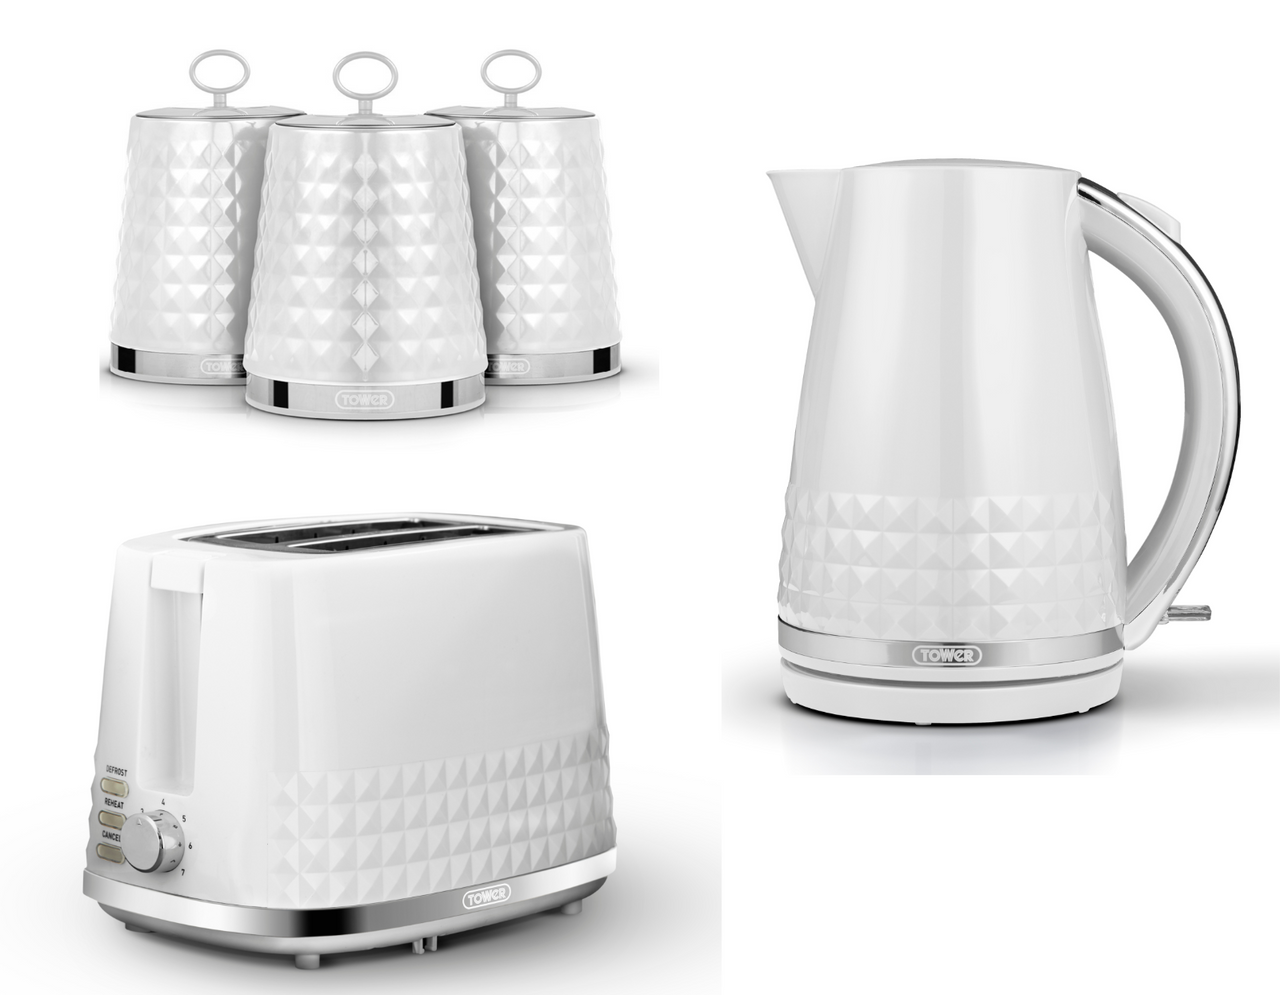 Tower Solitaire Kettle 2 Slice Toaster & Canisters Matching Set White & Chrome